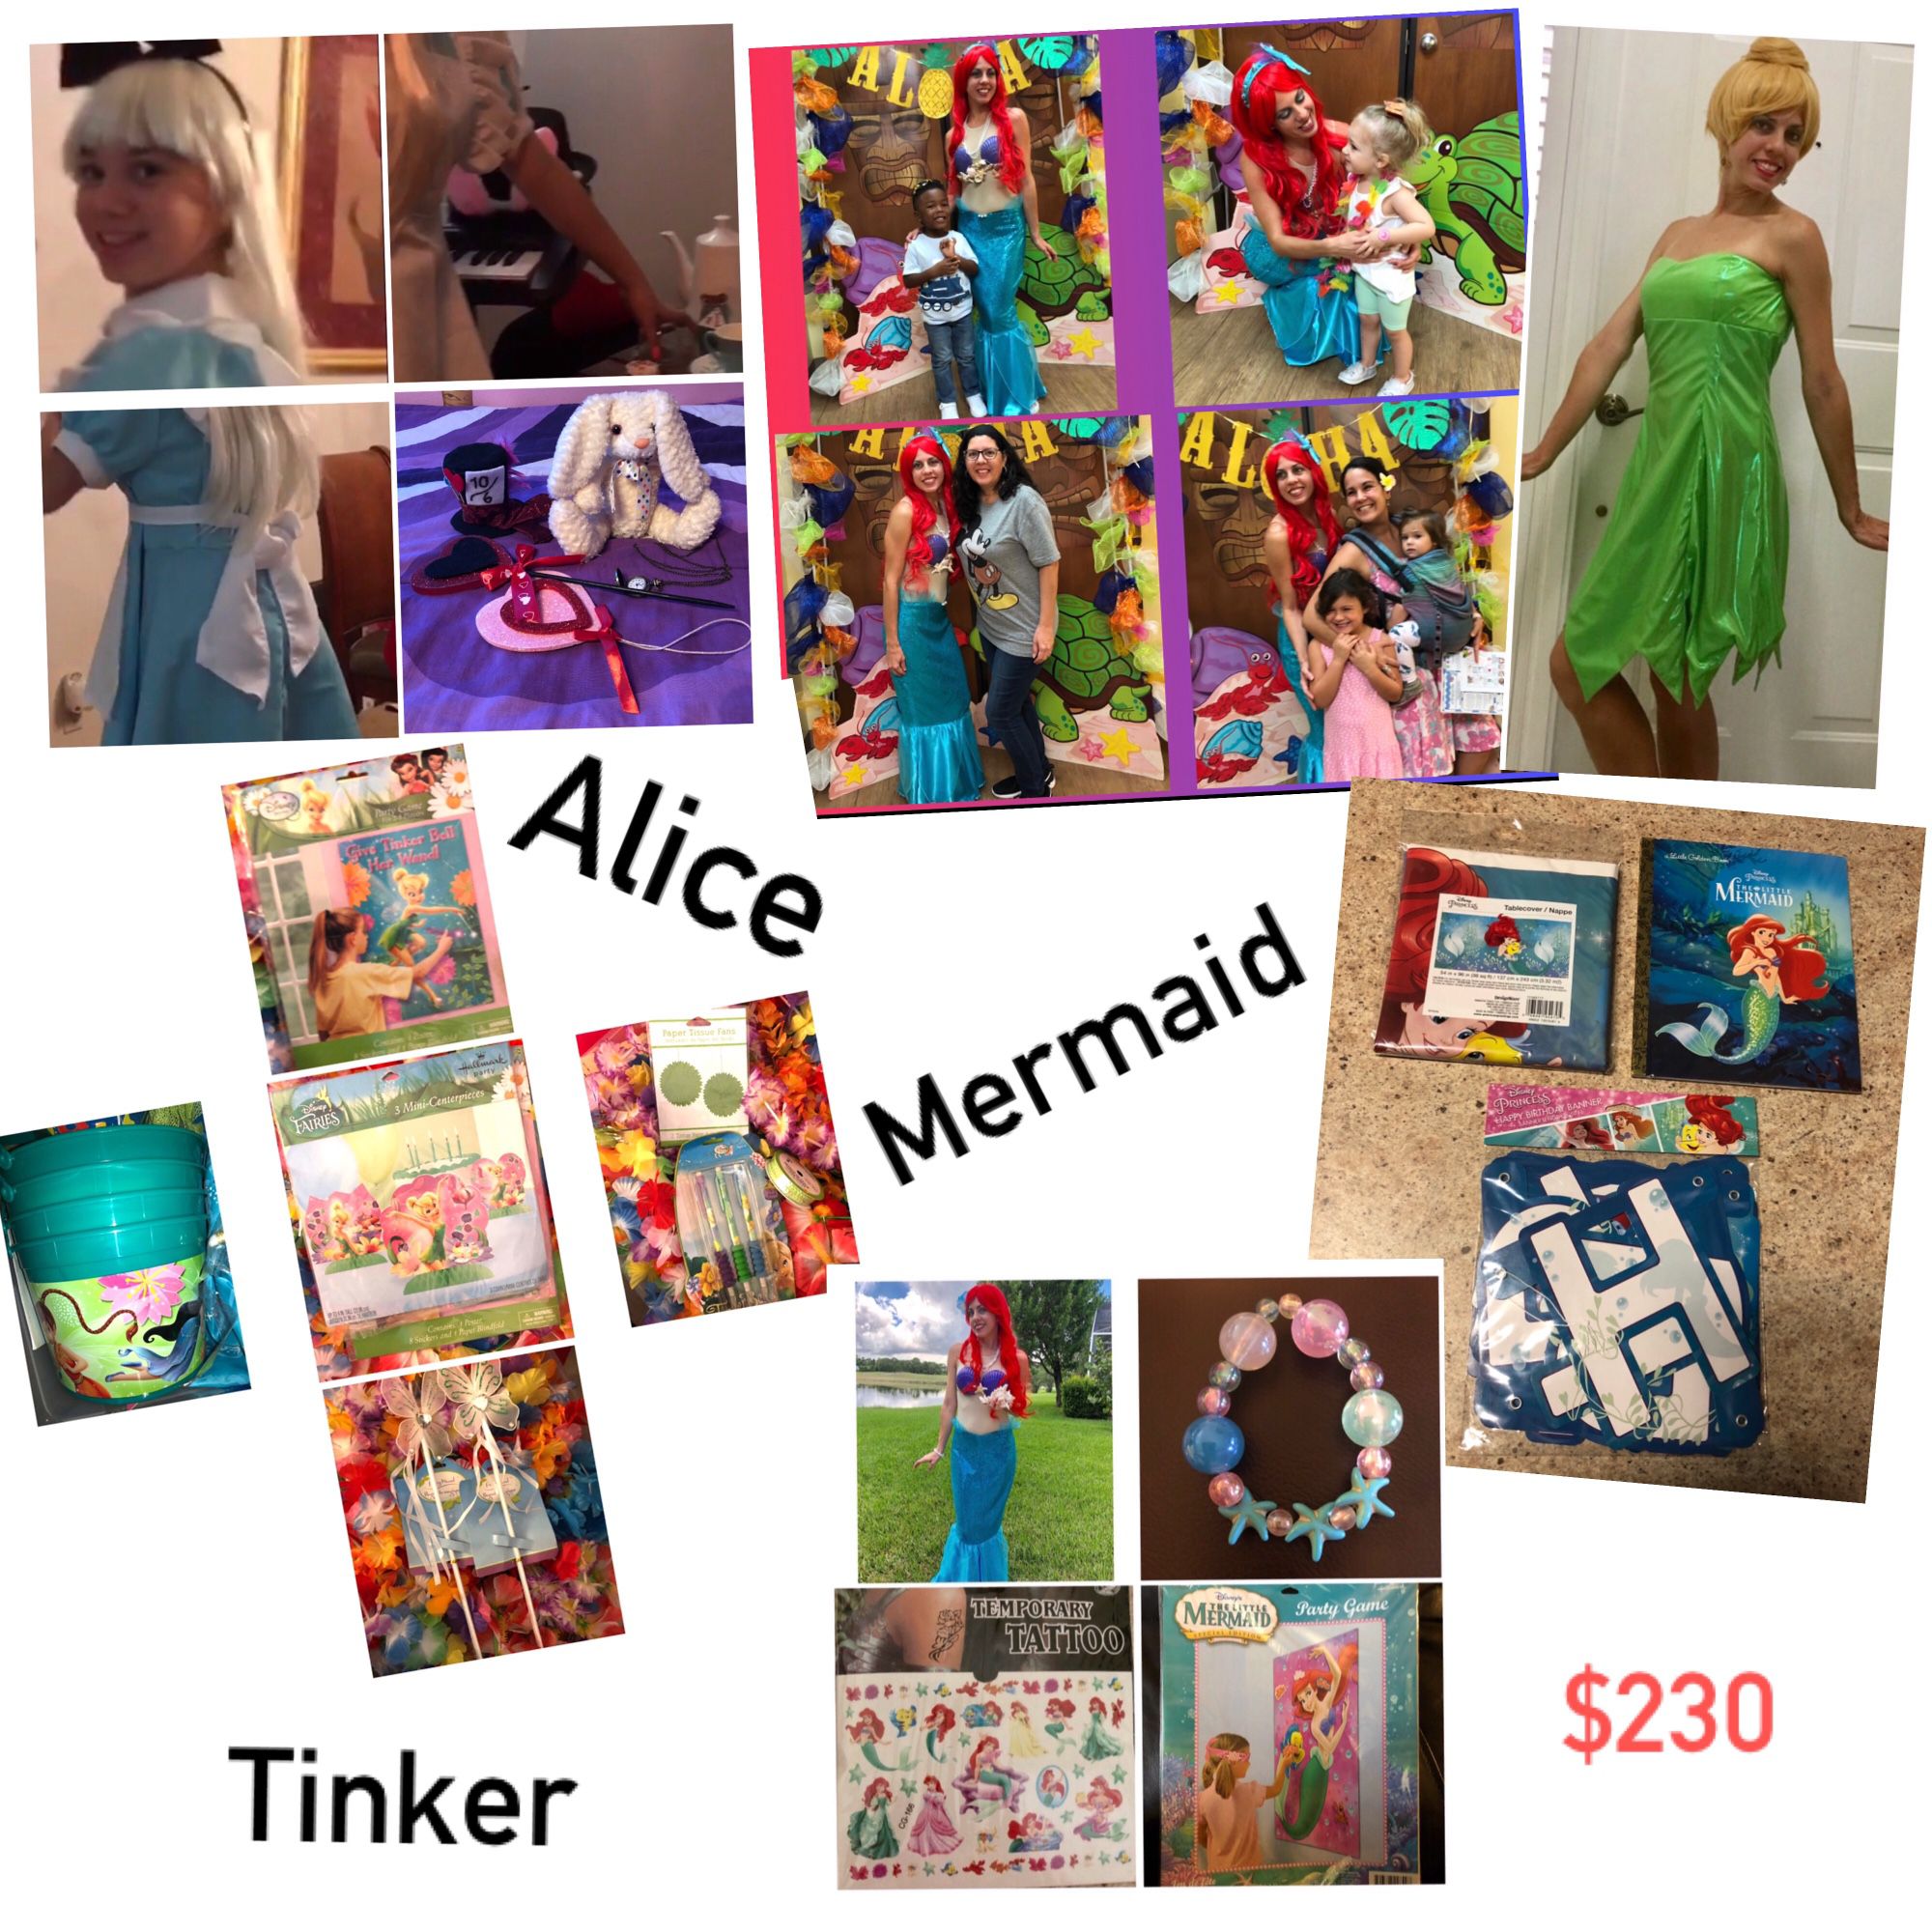 Mermaid, Tinker & Alice Costume Outfits